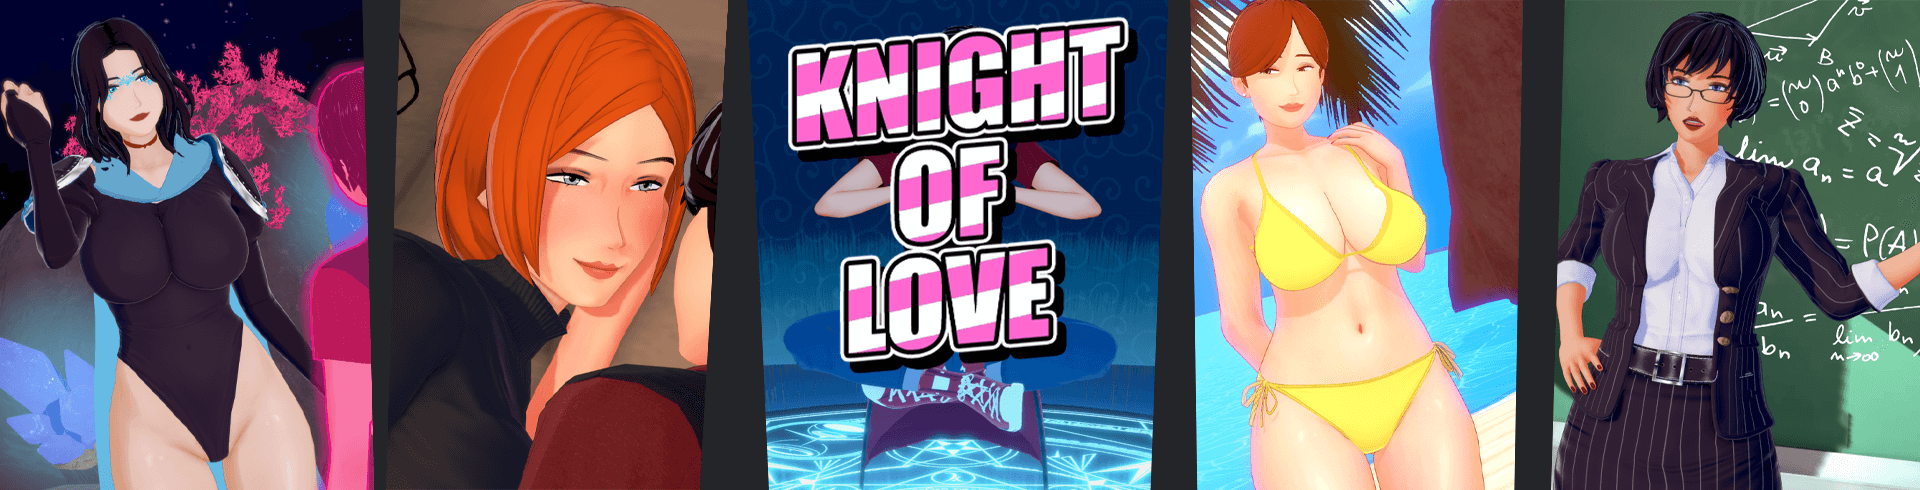 Knight of Love [Part 1 F3]